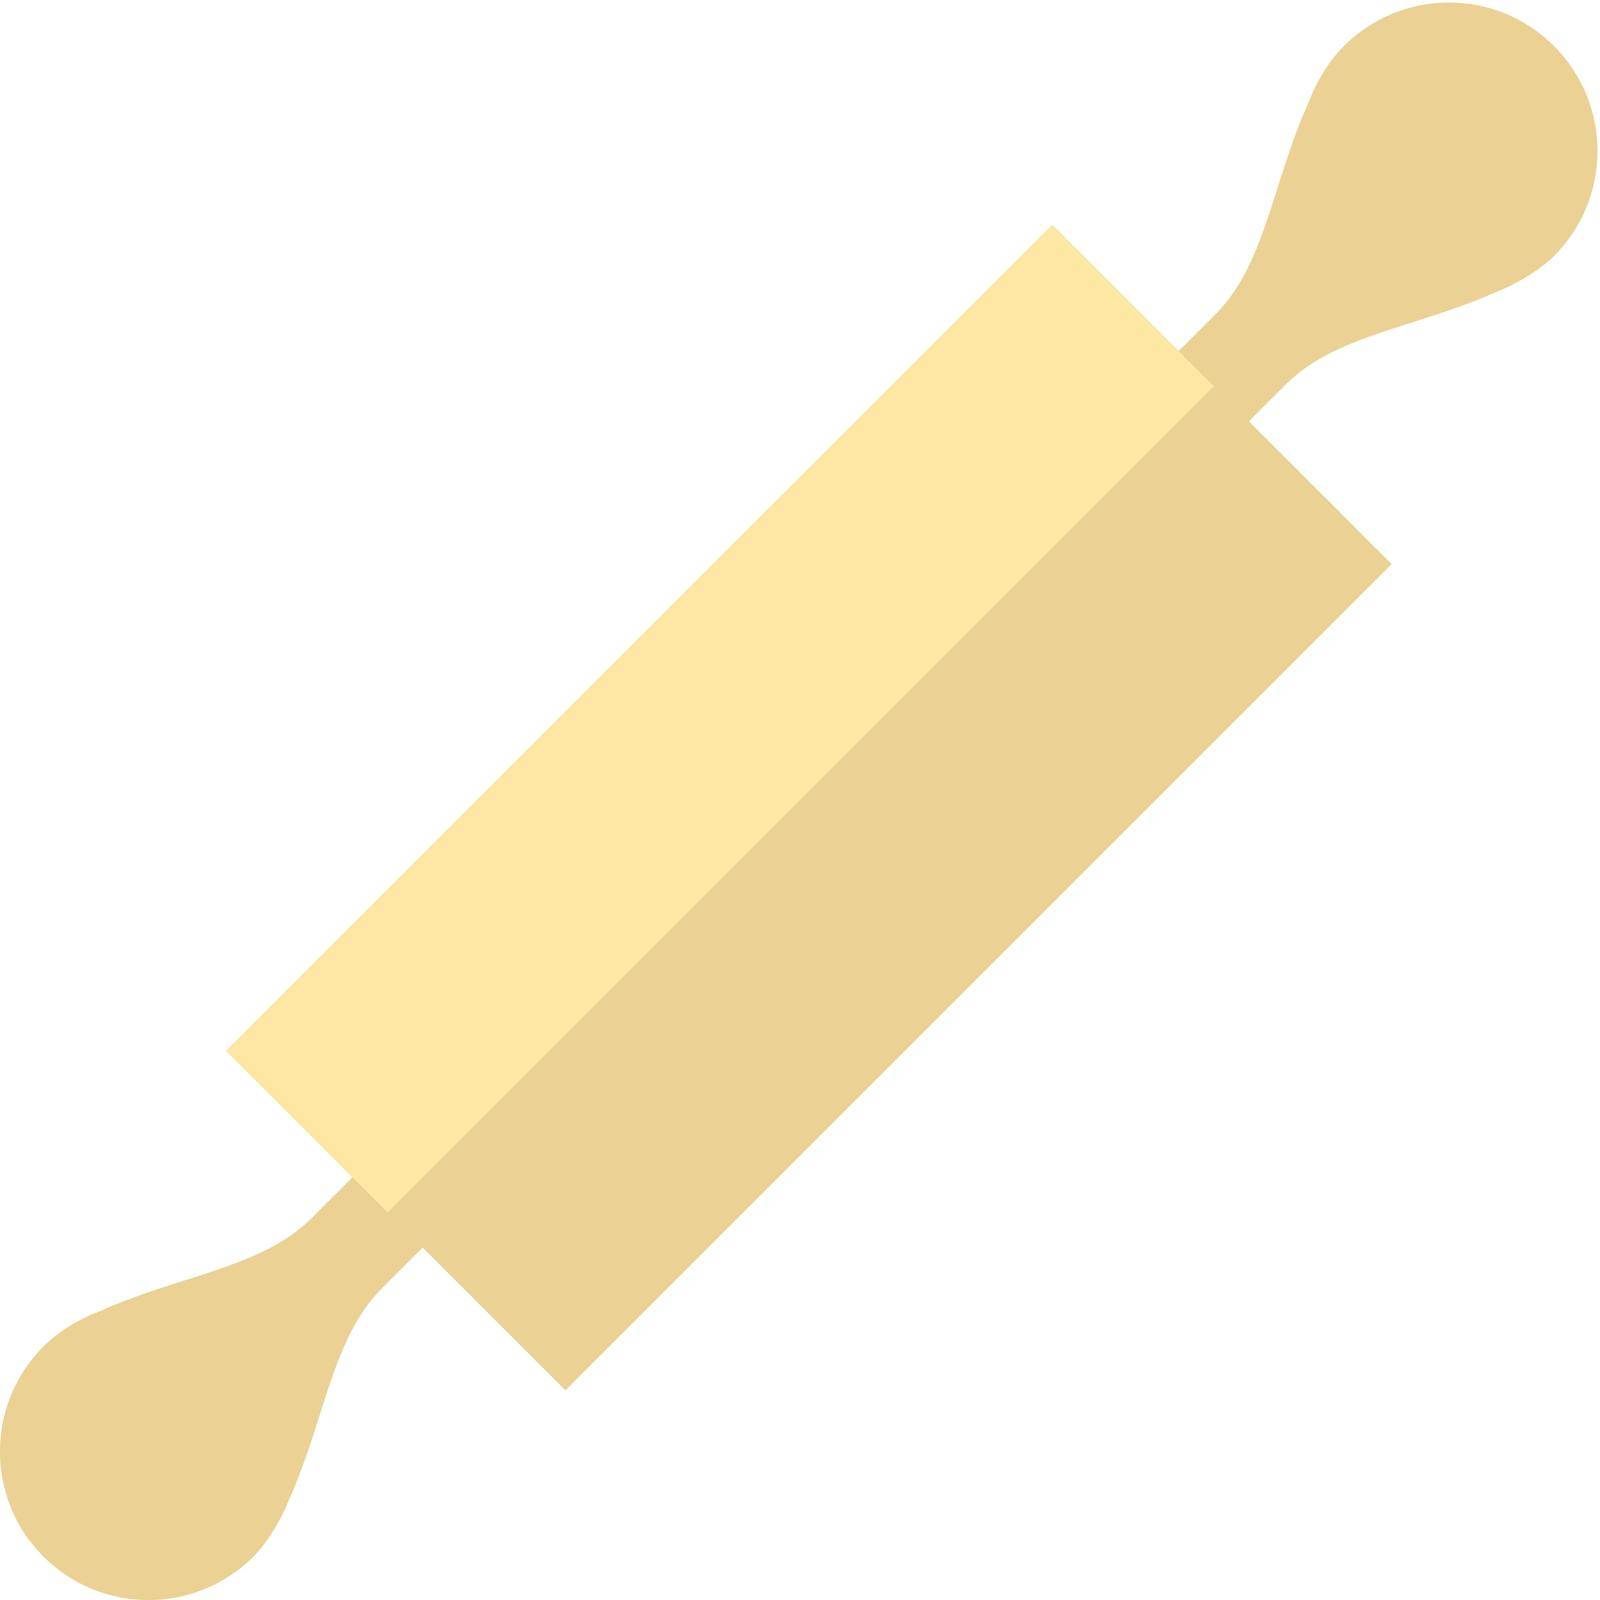 Wooden roller icon in flat color style. Baking food cake bakery gourmet